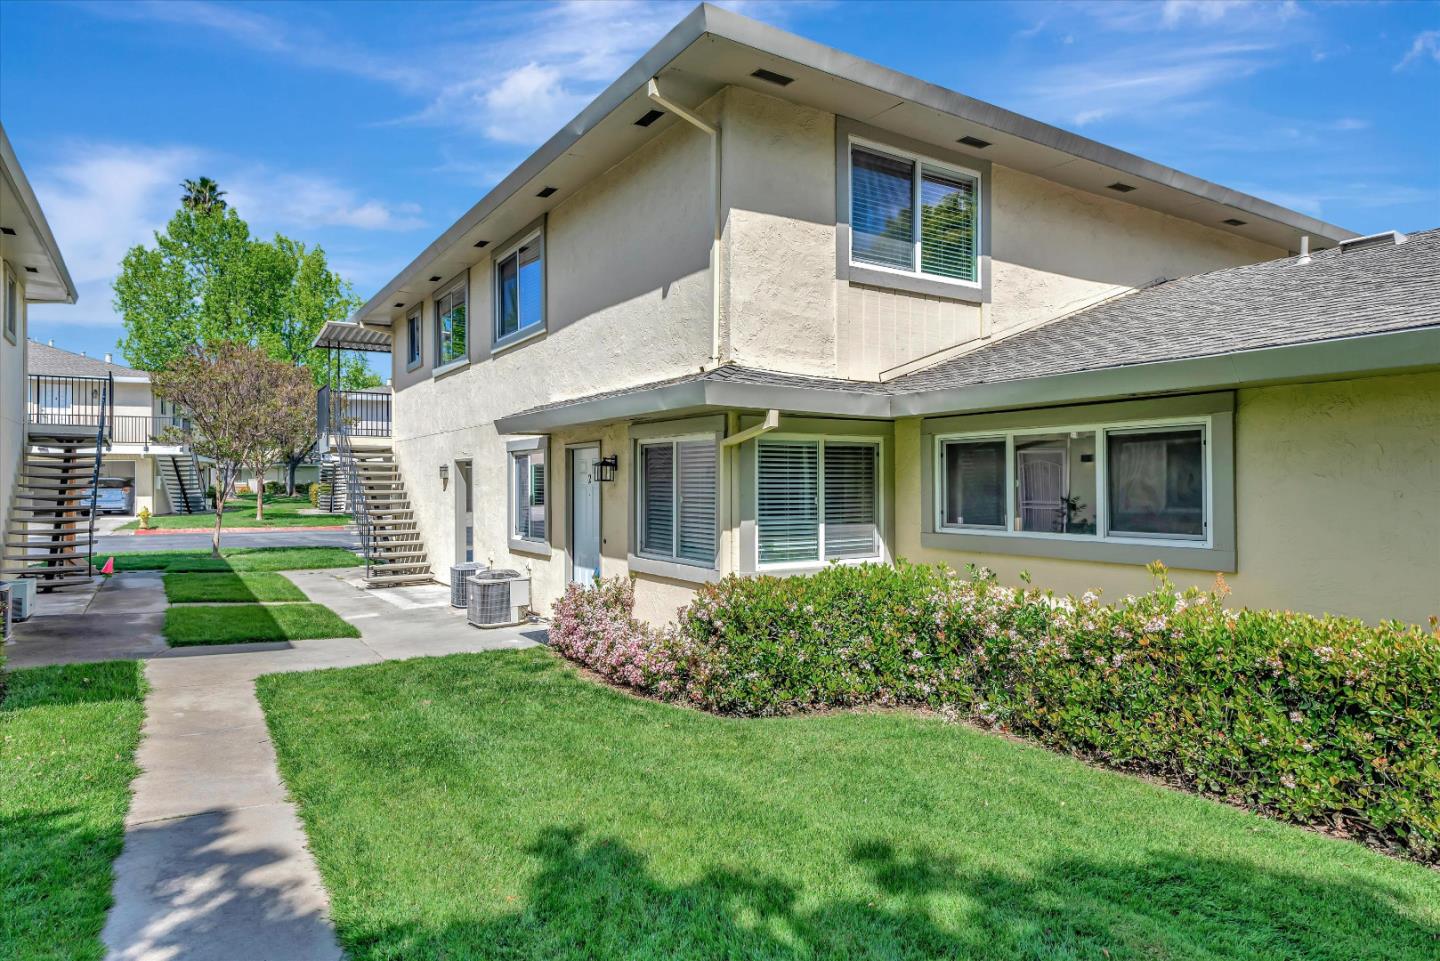 Photo of 4777 Clydelle Ave #2 in San Jose, CA